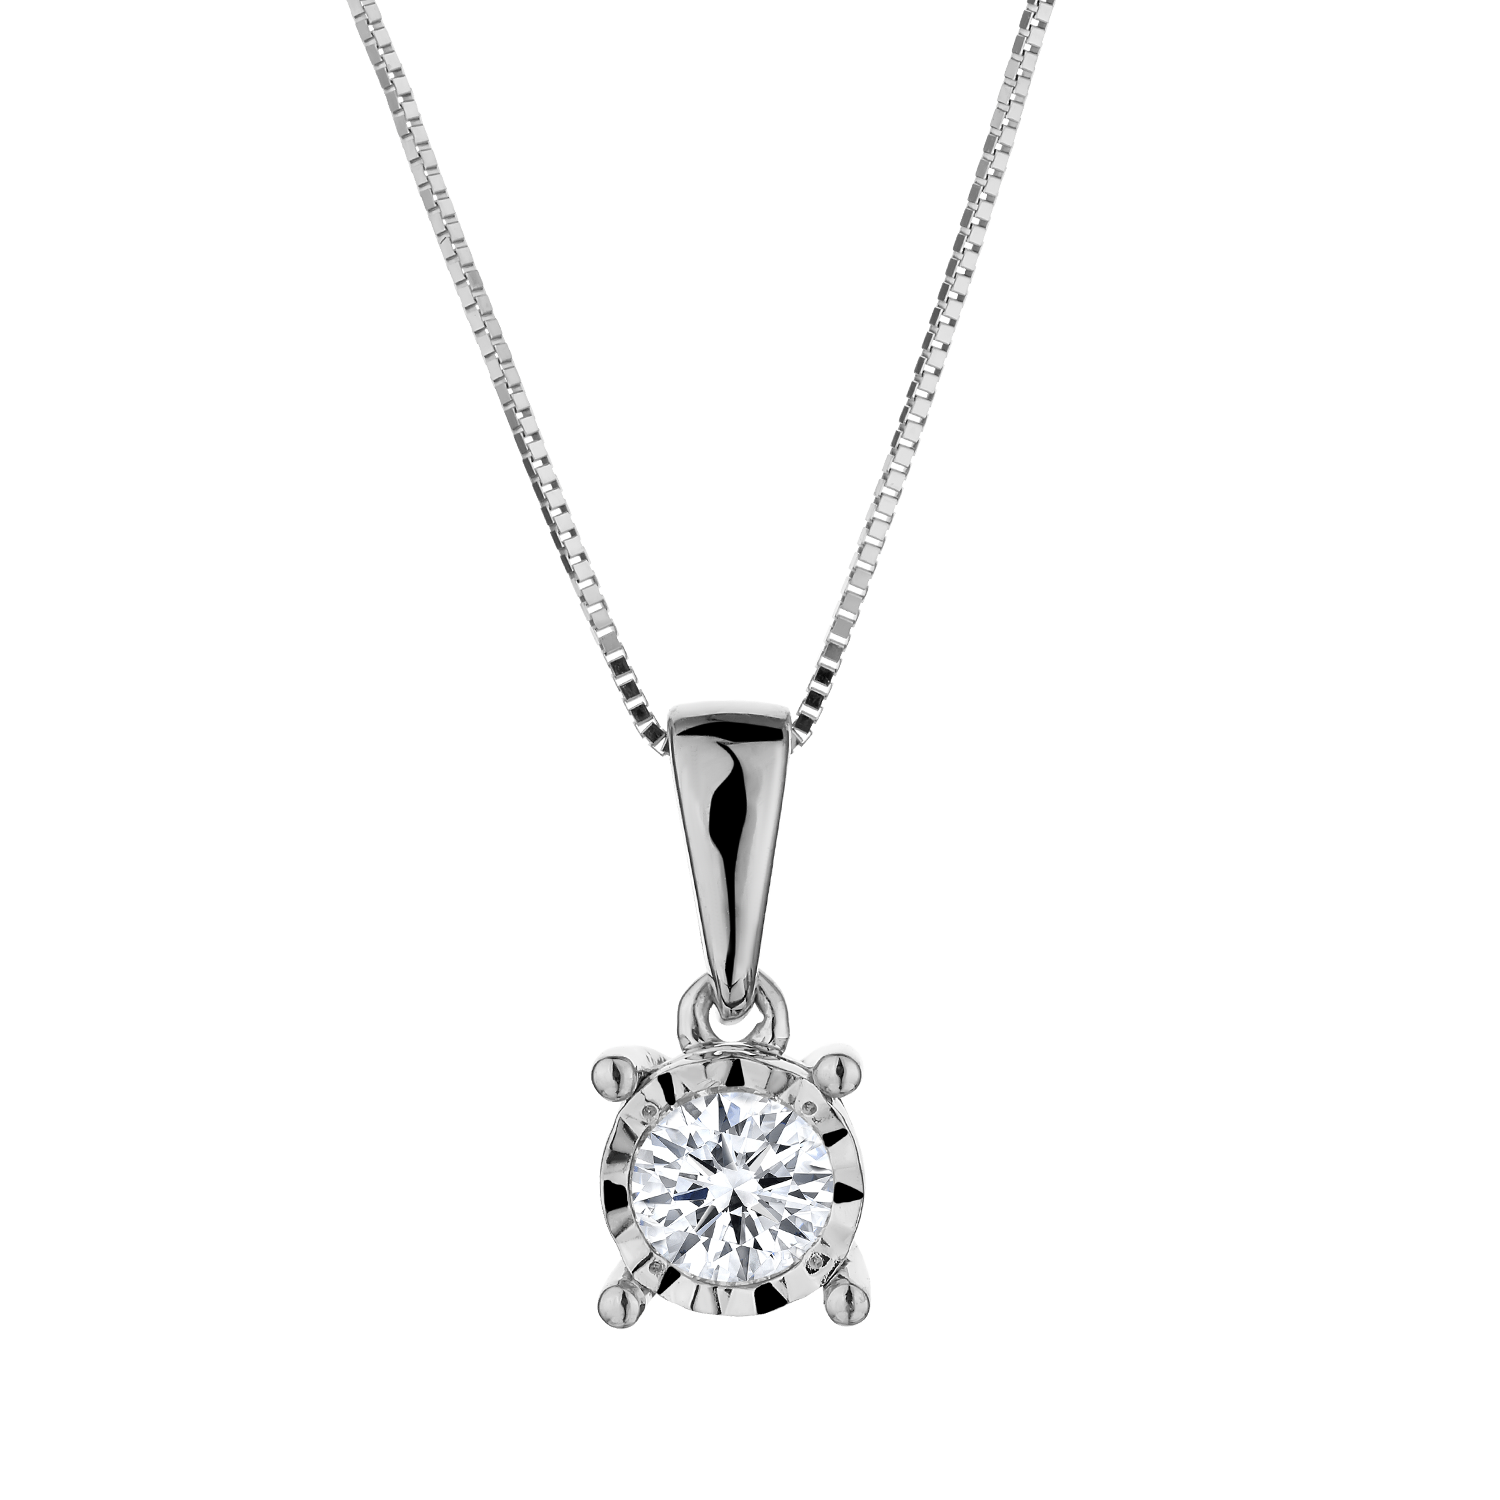 .25 Carat Diamond "Miracle" Pendant,  14kt White Gold. Necklaces and Pendants. Griffin Jewellery Designs.